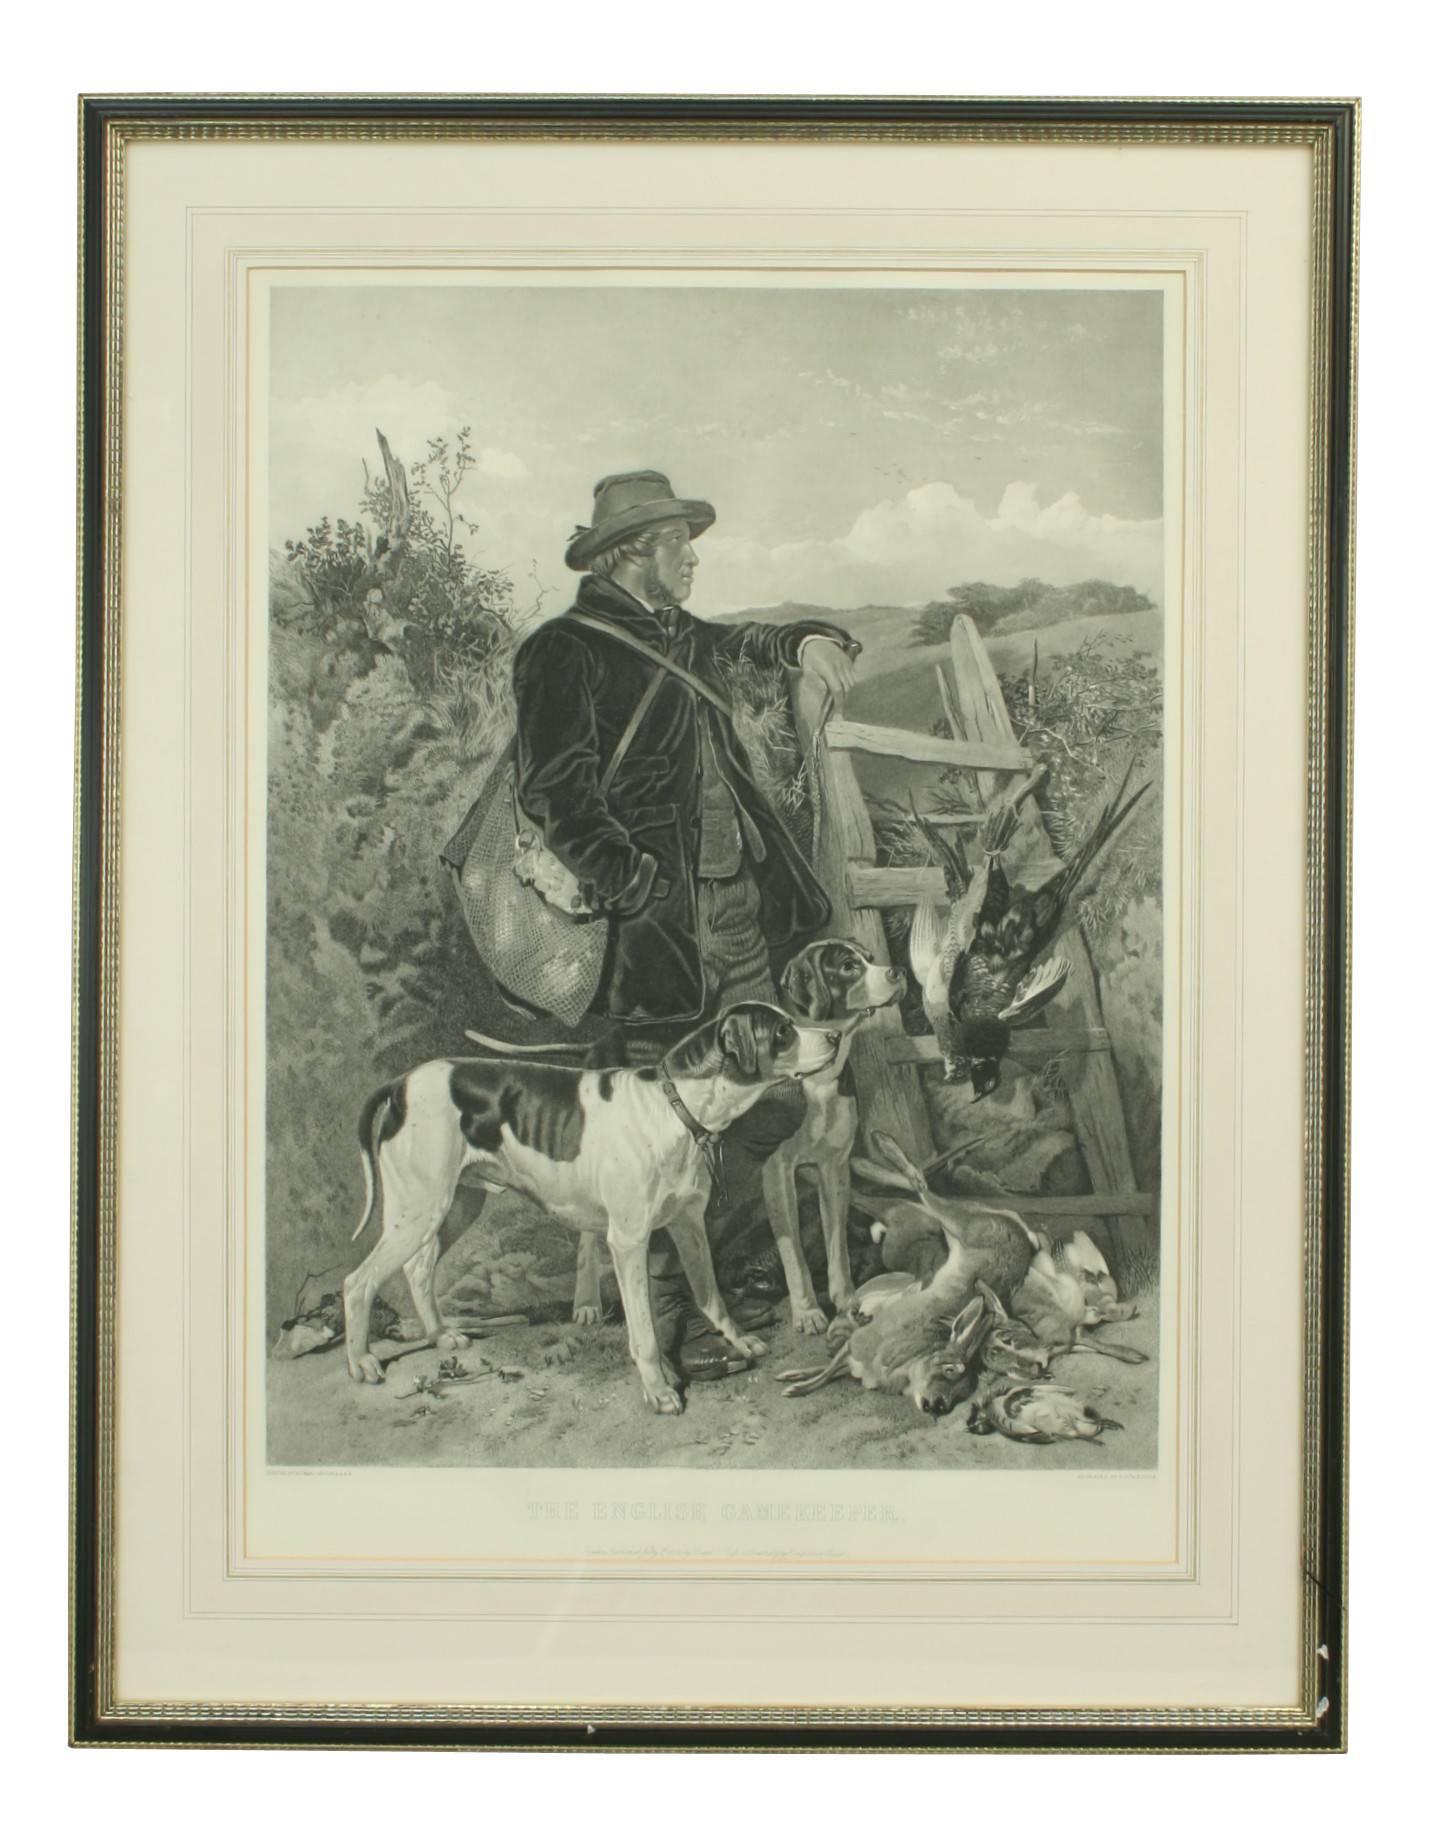 English and Scottish Gamekeepers. 
A large pair of mixed method engravings of an English and Scottish gamekeeper, after the original painting by Richard Ansdell. Published July 1st,1858. Both shooting engravings by F. Stackpoole and Titled: English